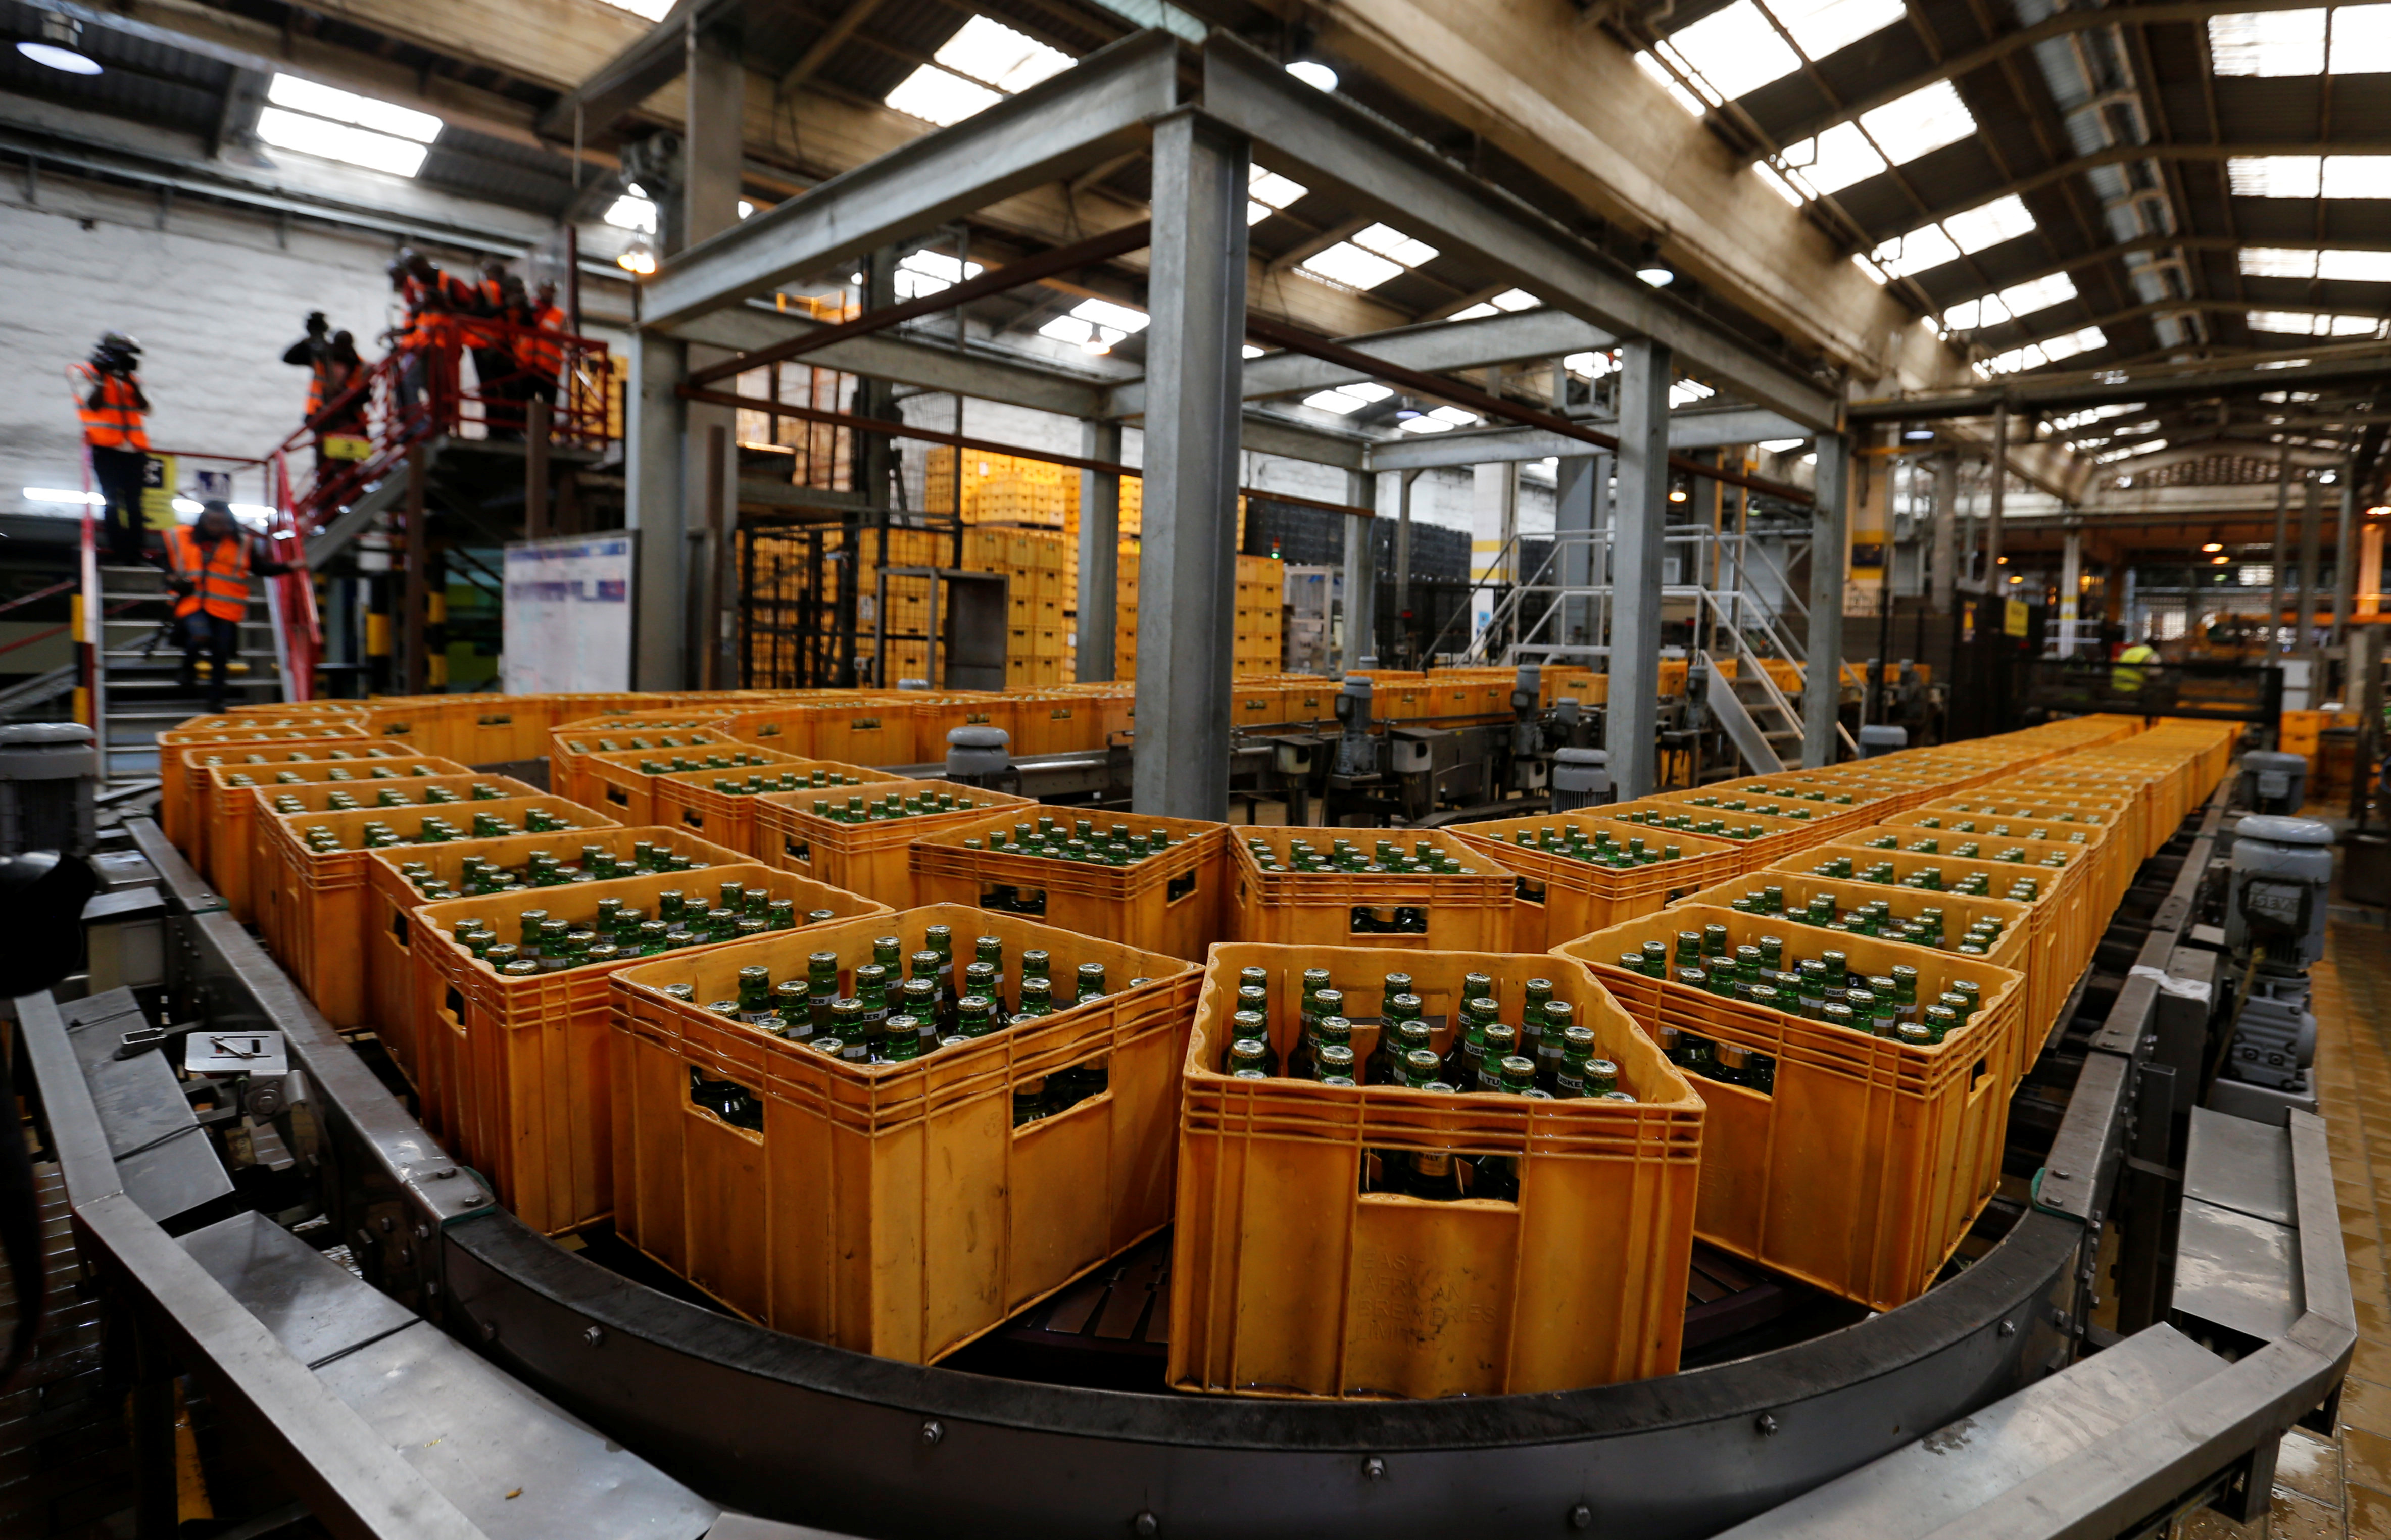 Crates of Tusker Malt beer are seen on a conveyor belt at the East African Breweries Limited factory in Ruaraka factory in Nairobi.